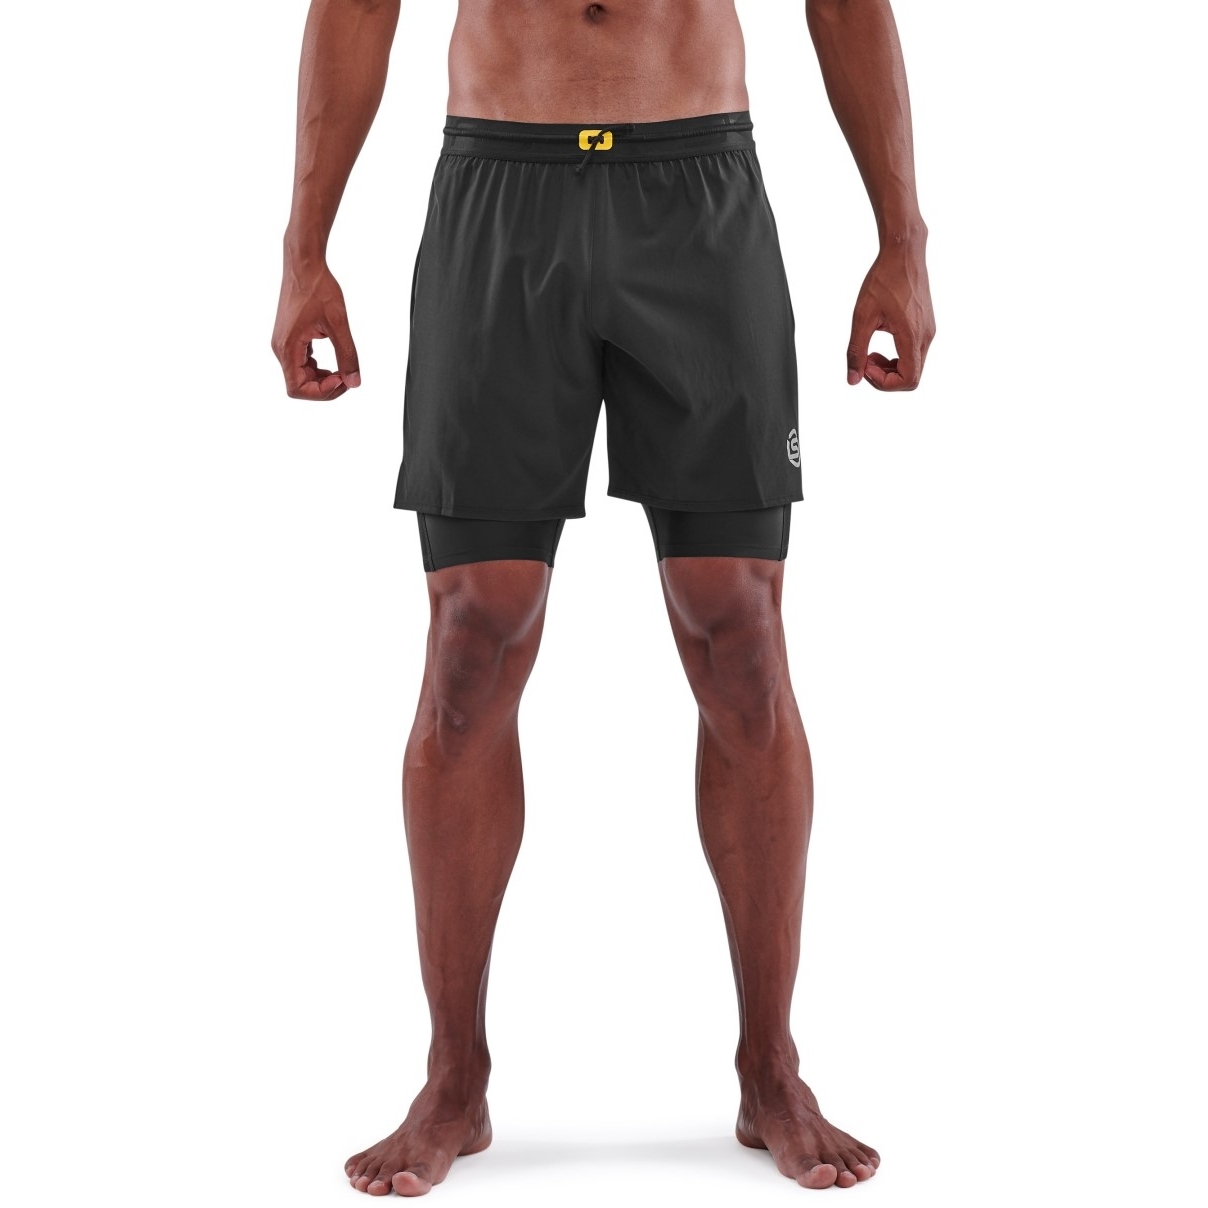 Image of SKINS 3-Series Superpose Fitness Shorts 2 in 1 - Black